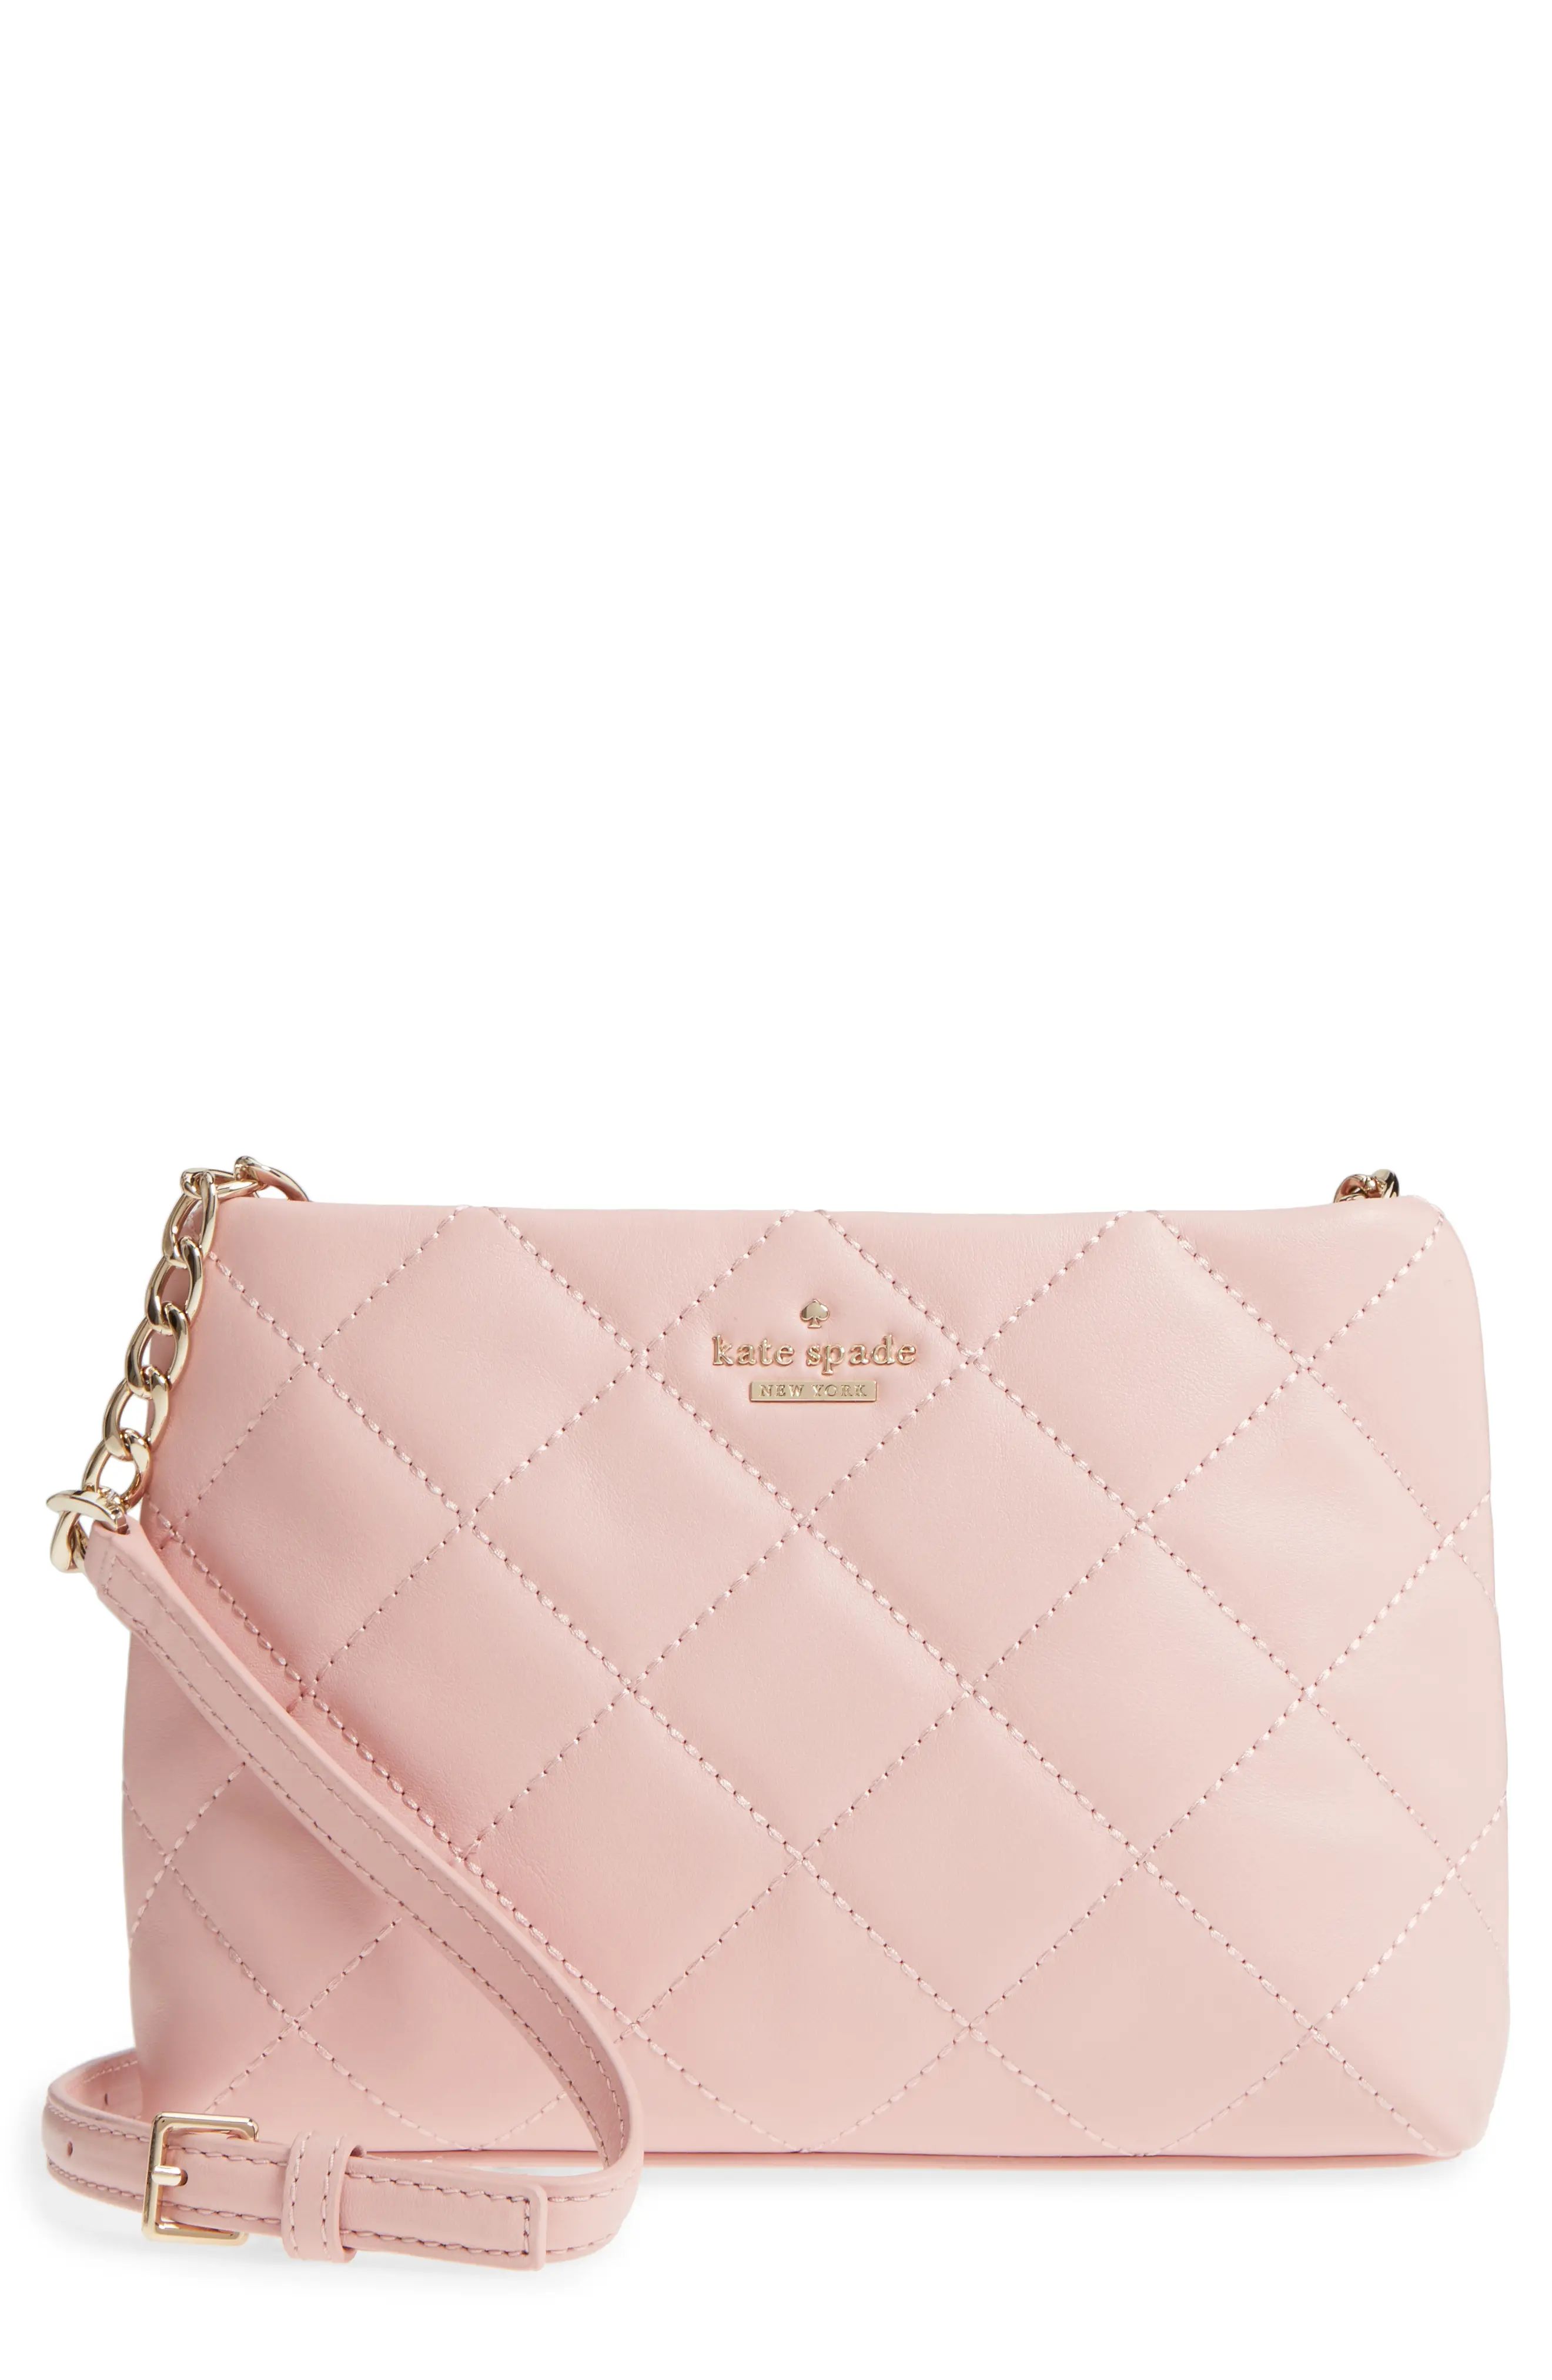 emerson place caterina leather crossbody bag | Nordstrom